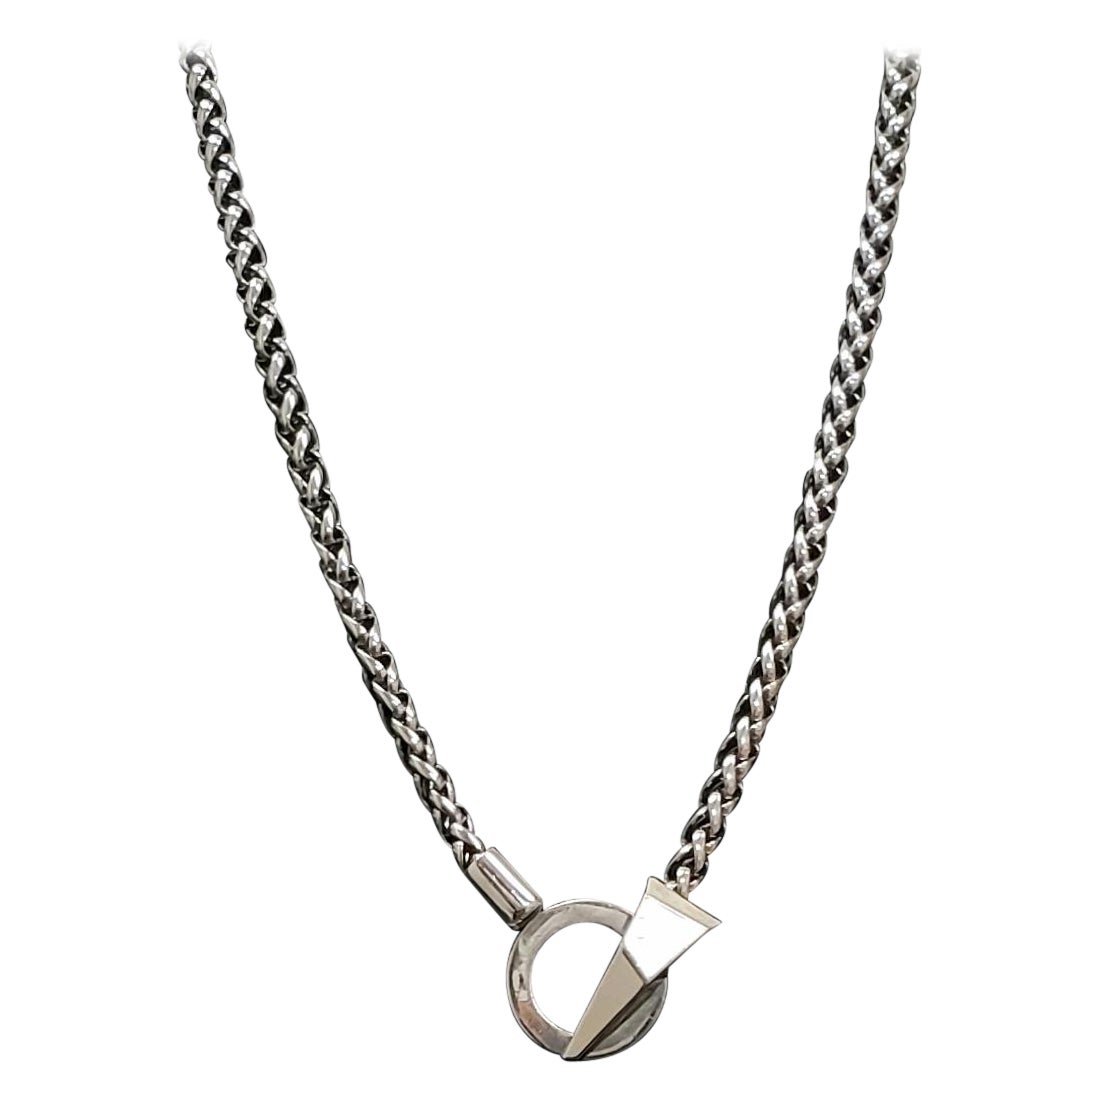 Spring 2011 L# 16 NEW VERSACE SILVER TONE METAL CHAIN For Sale